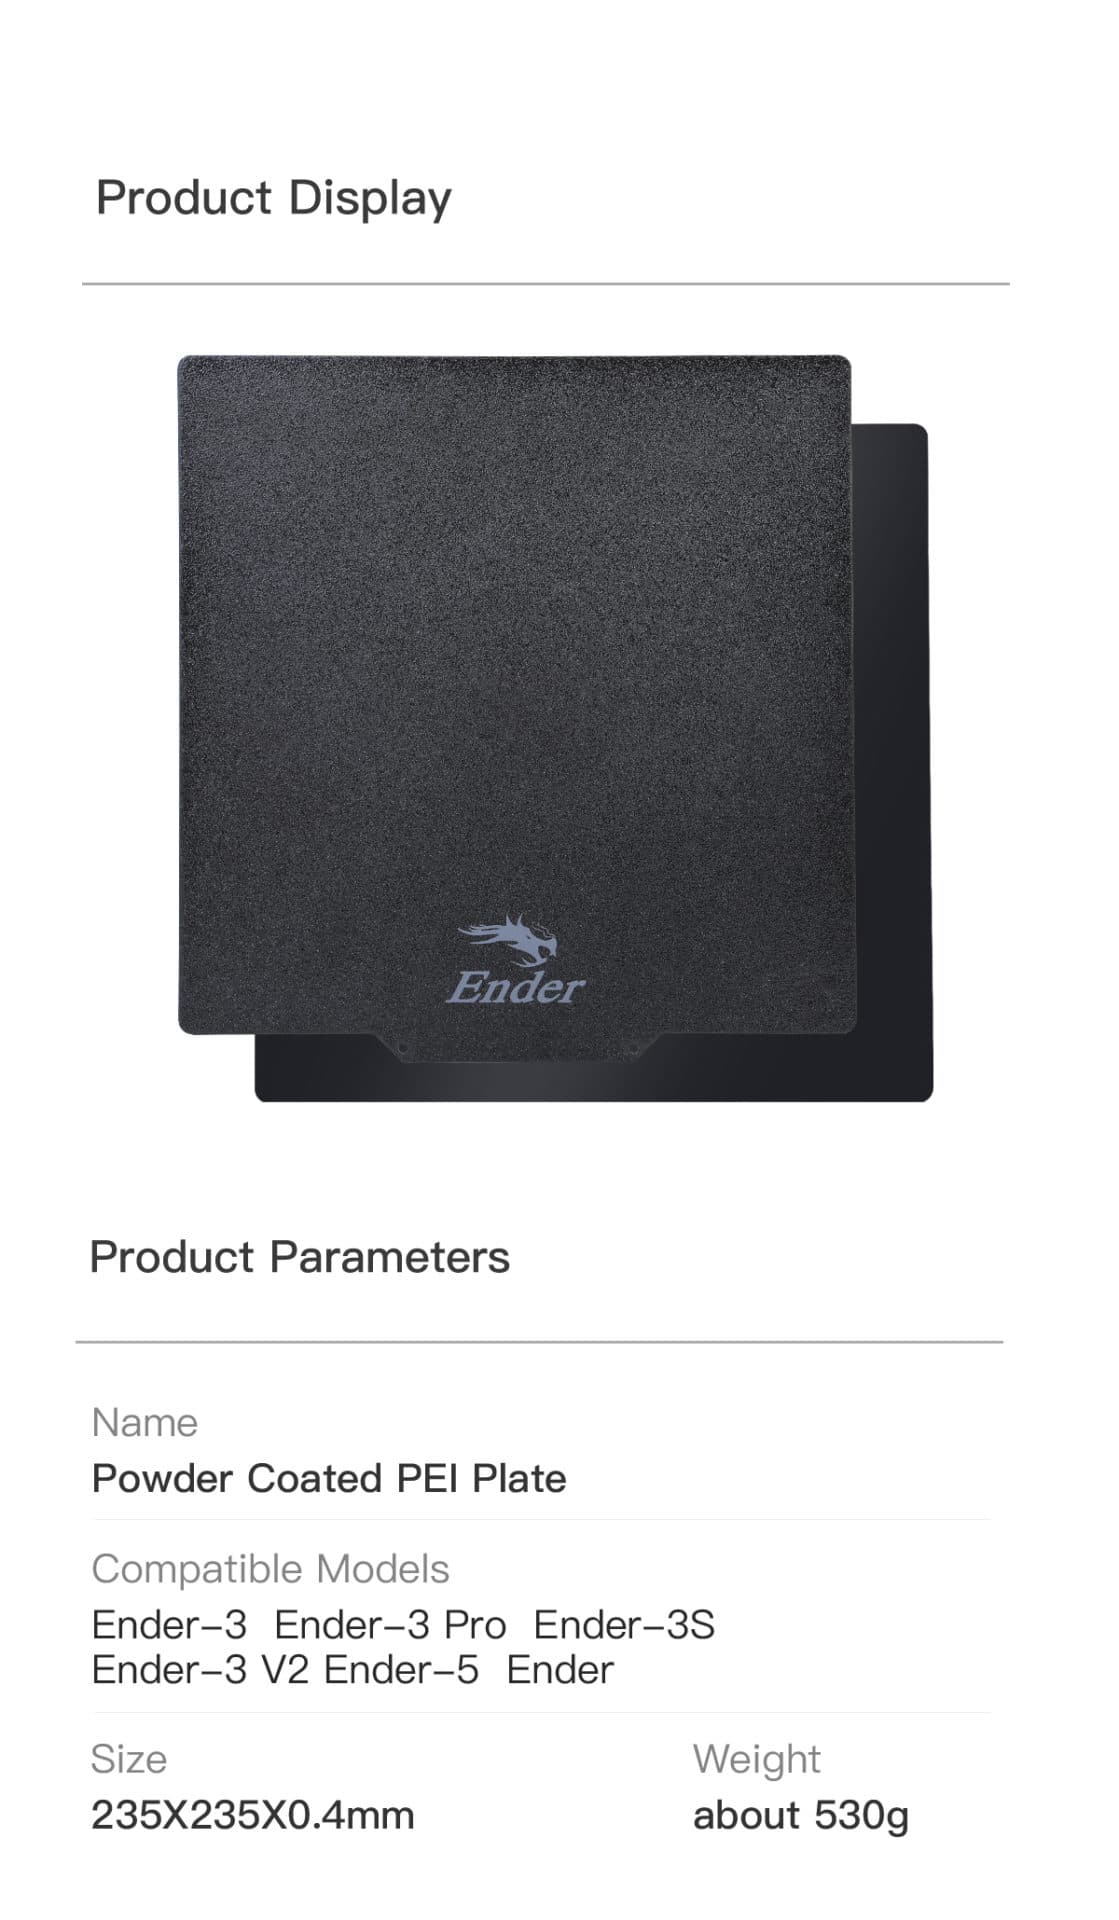 PEI Magnetic Flexible Plate is compatible with a lot of Ender Printer series by Creality.